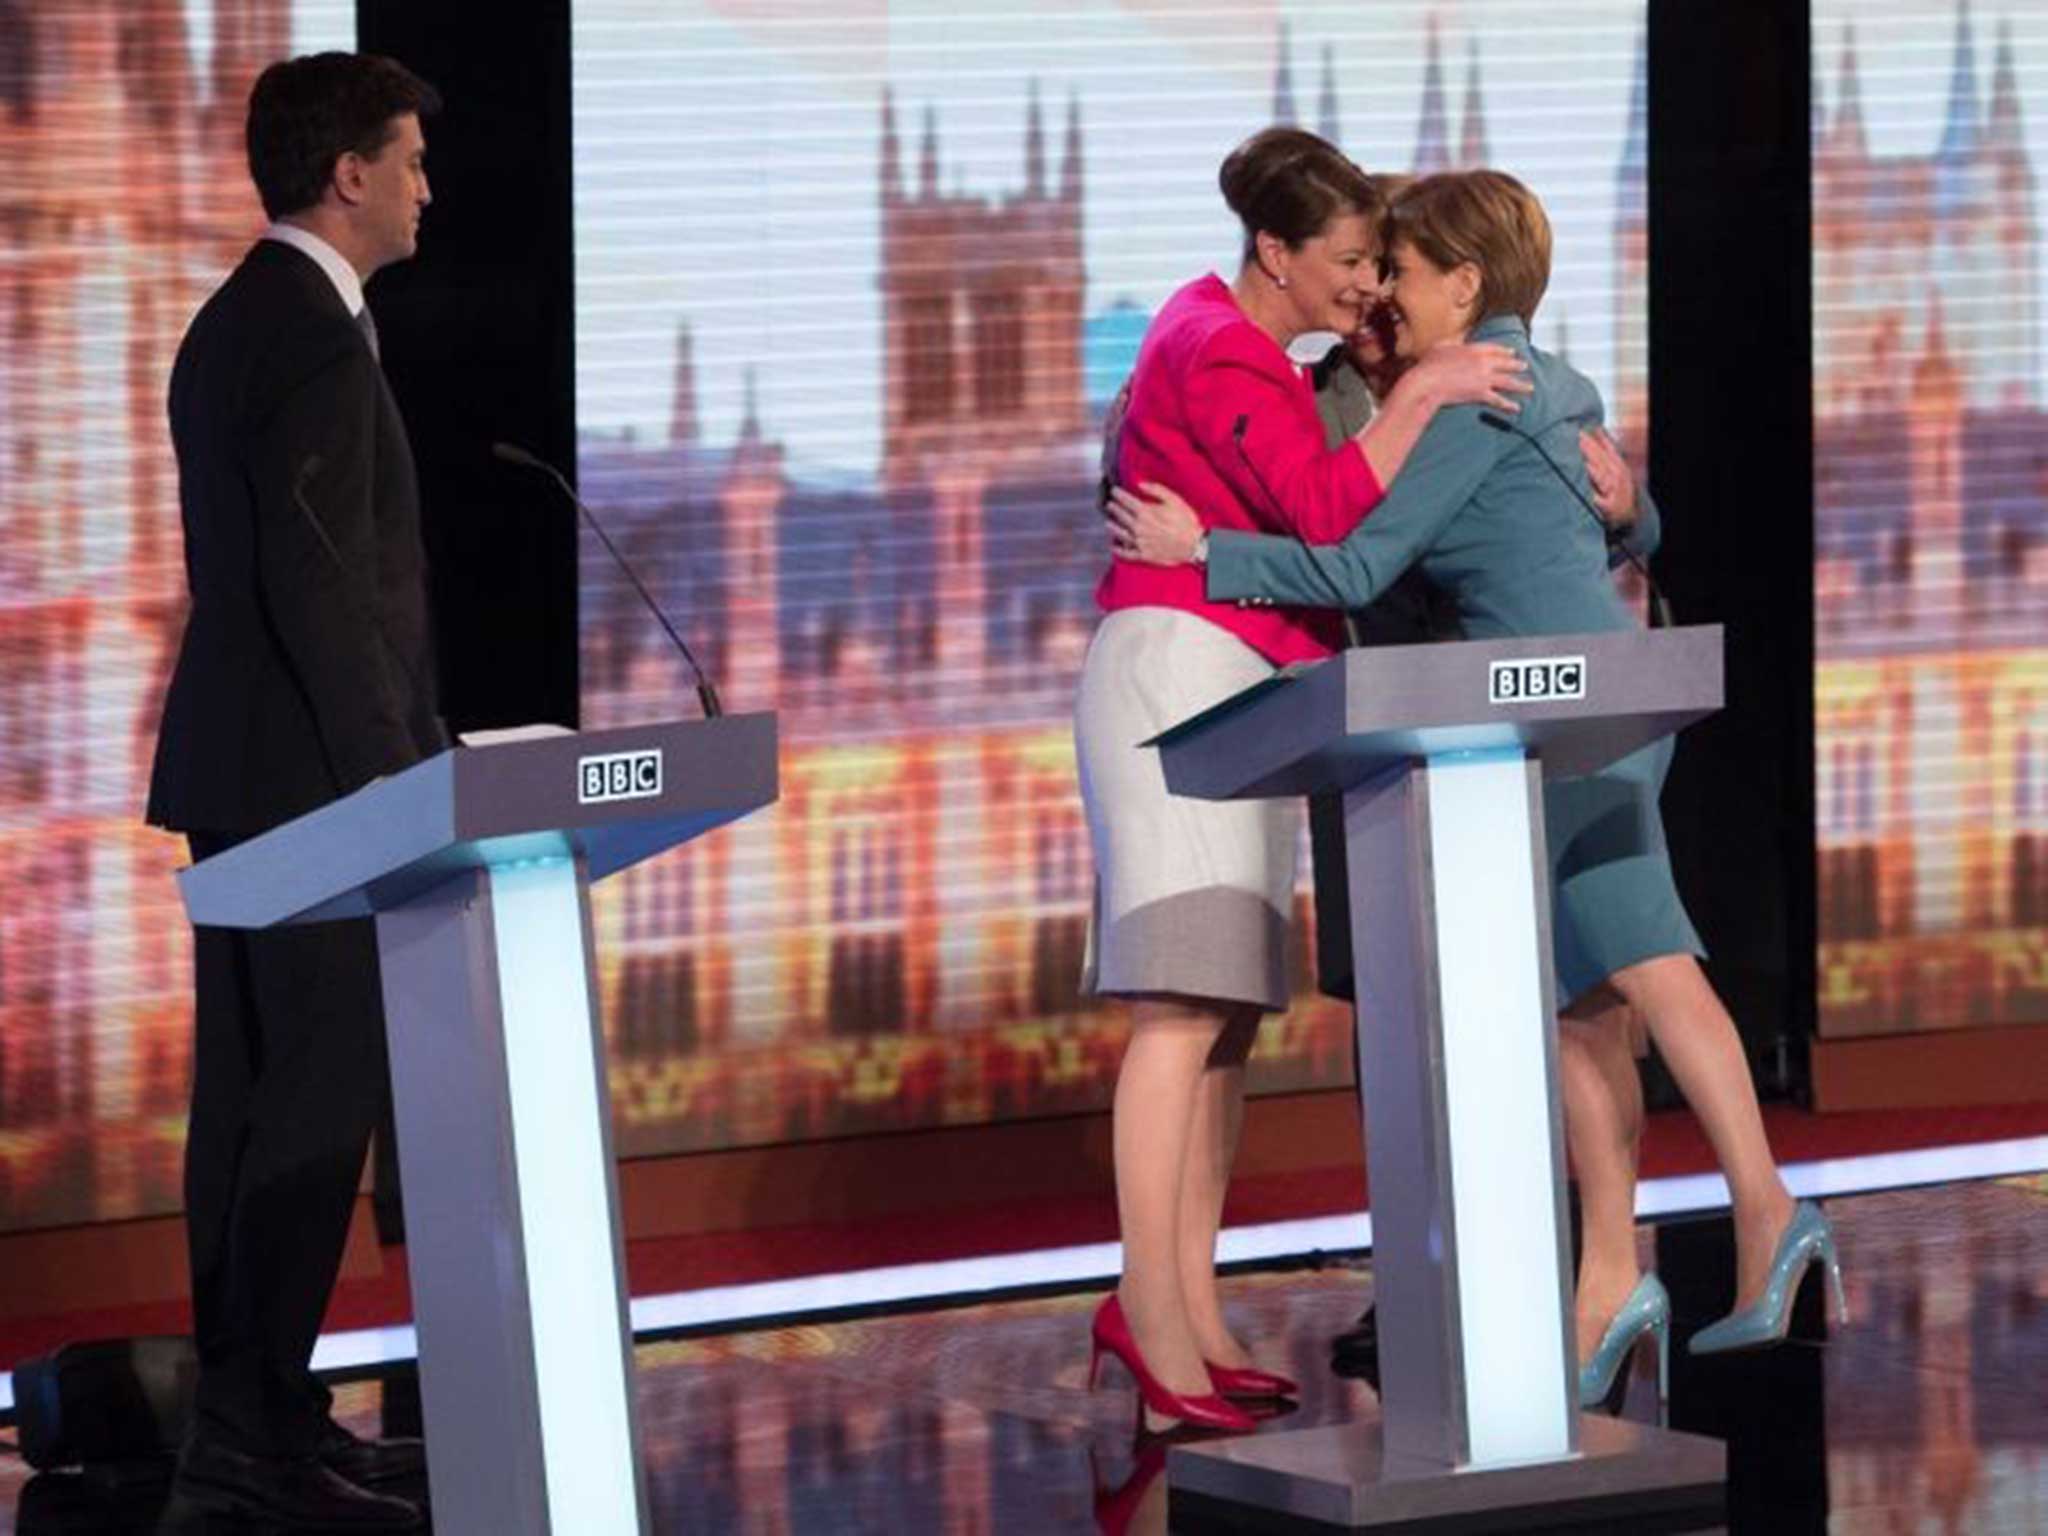 Natalie Bennett, Leanne Wood and Nicola Sturgeon embrace at the end of the debate